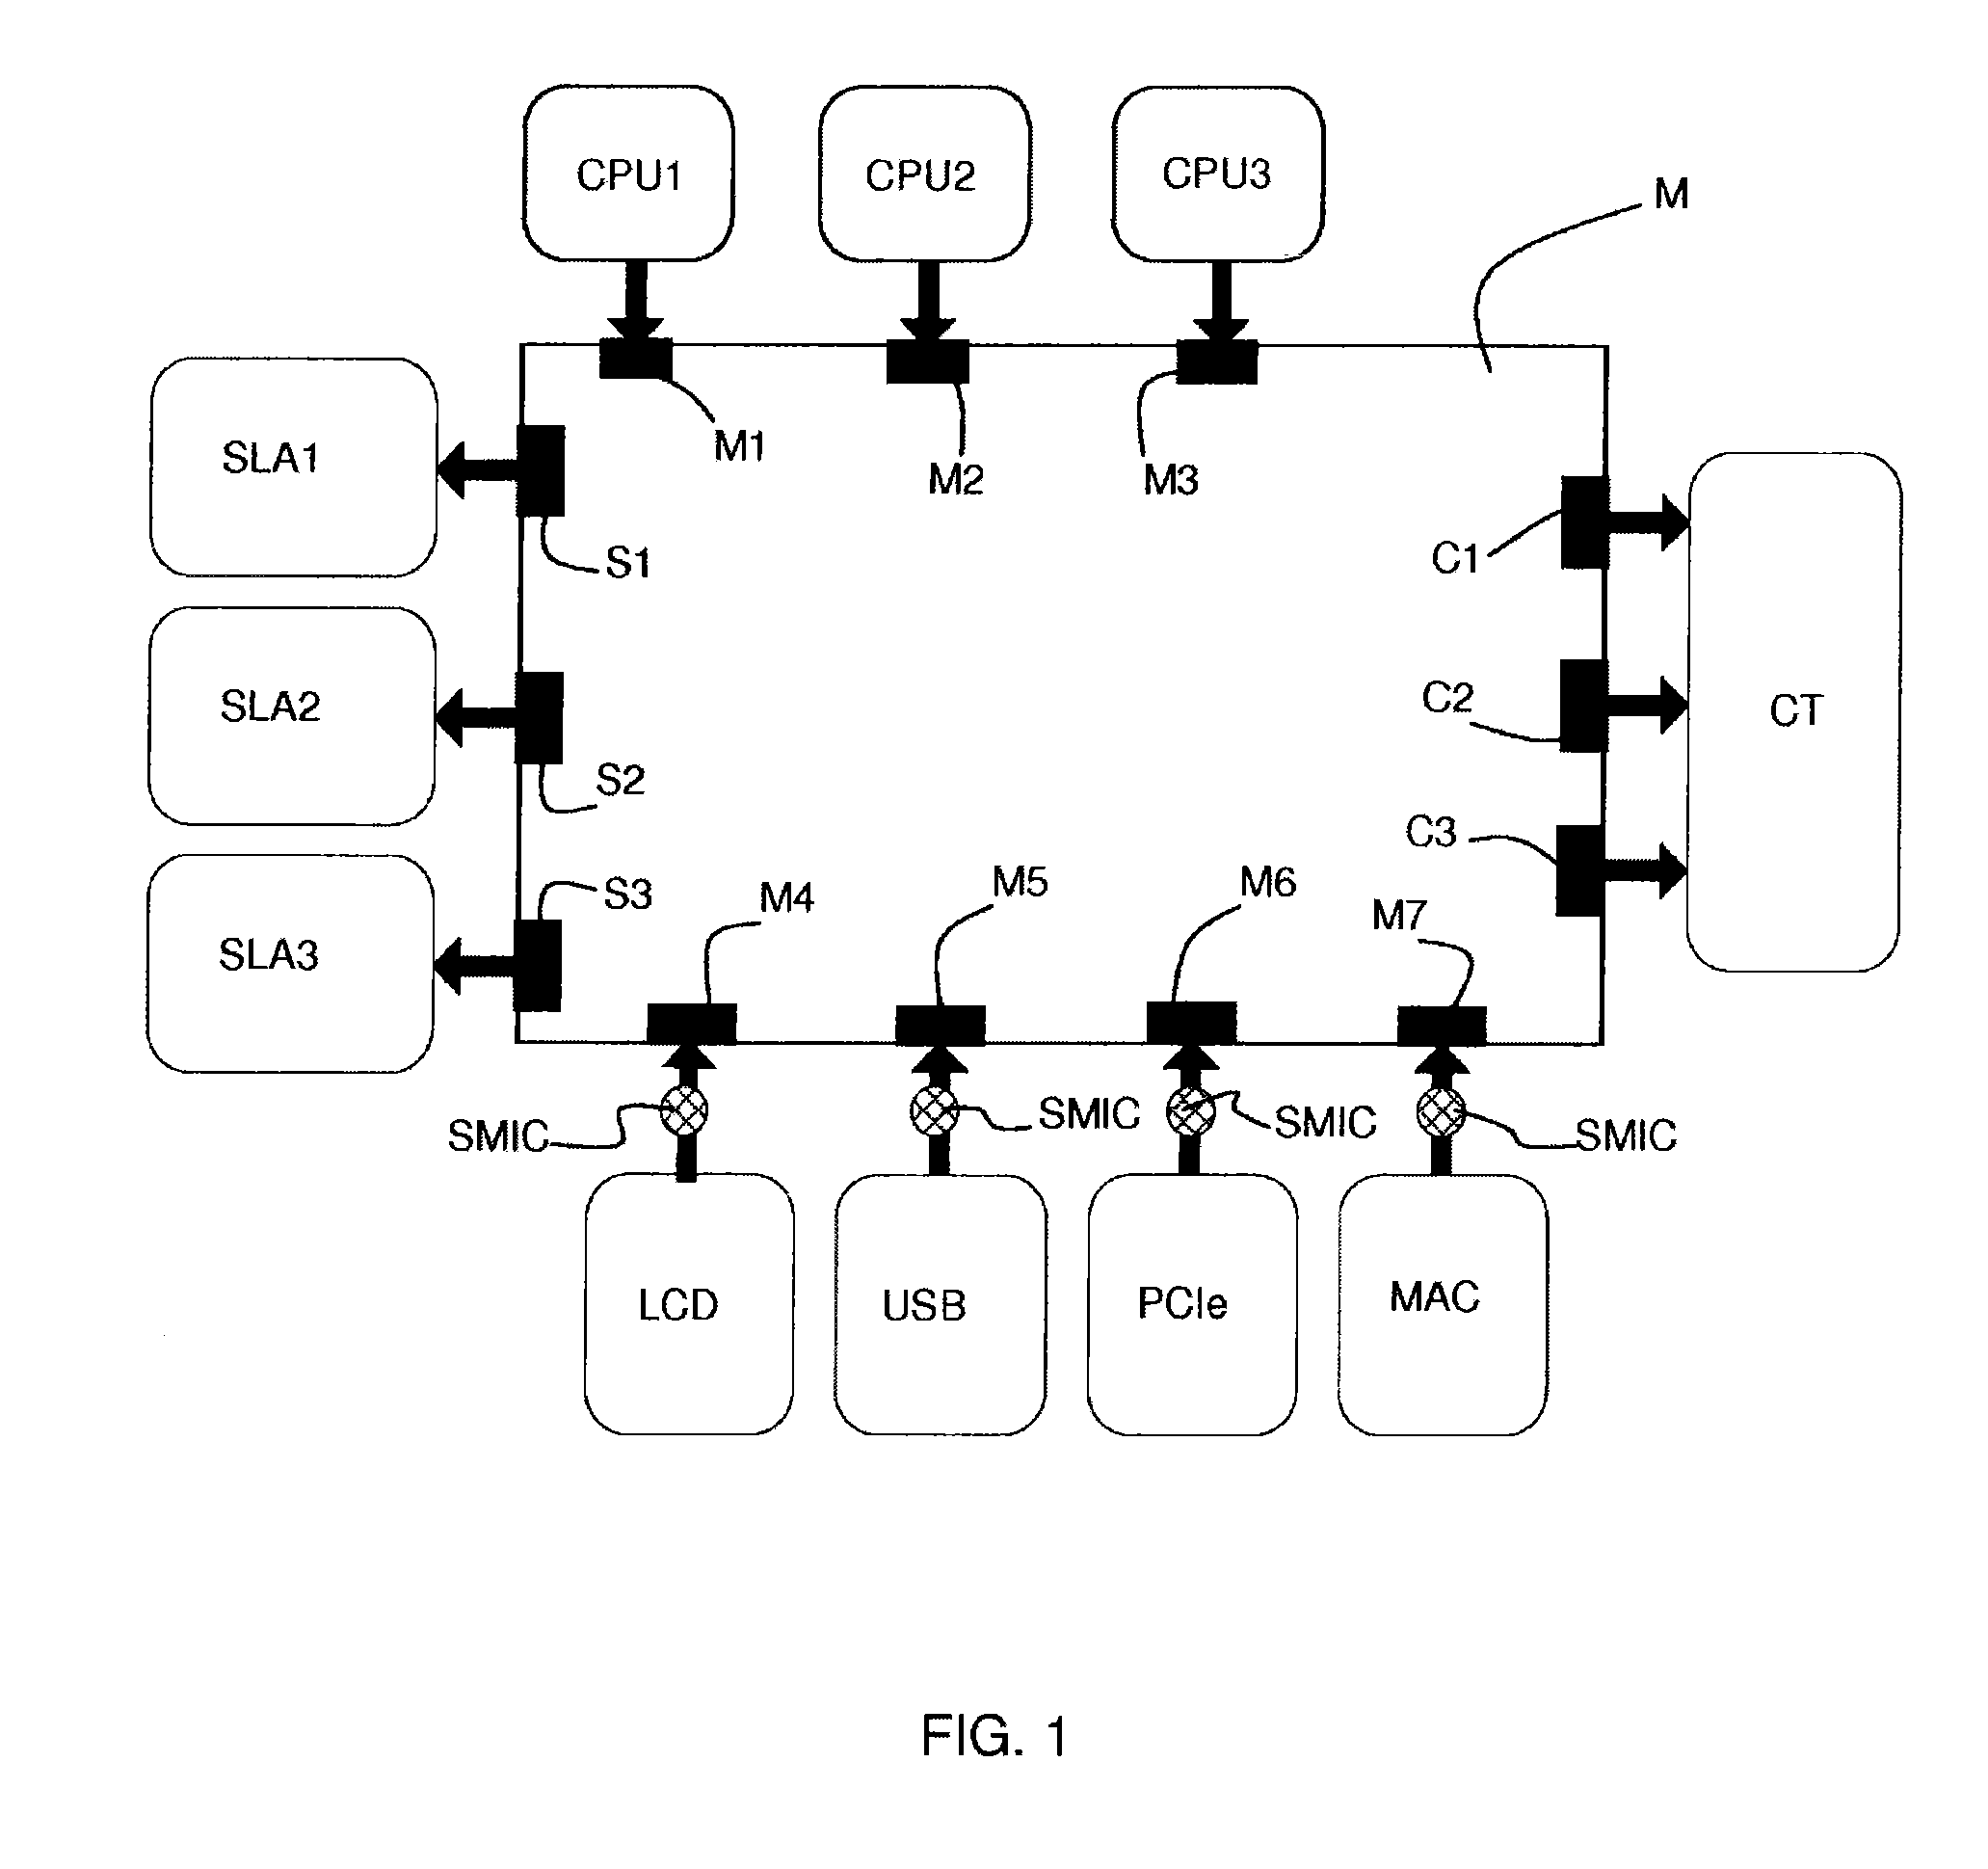 System for managing secure and nonsecure applications on one and the same microcontroller